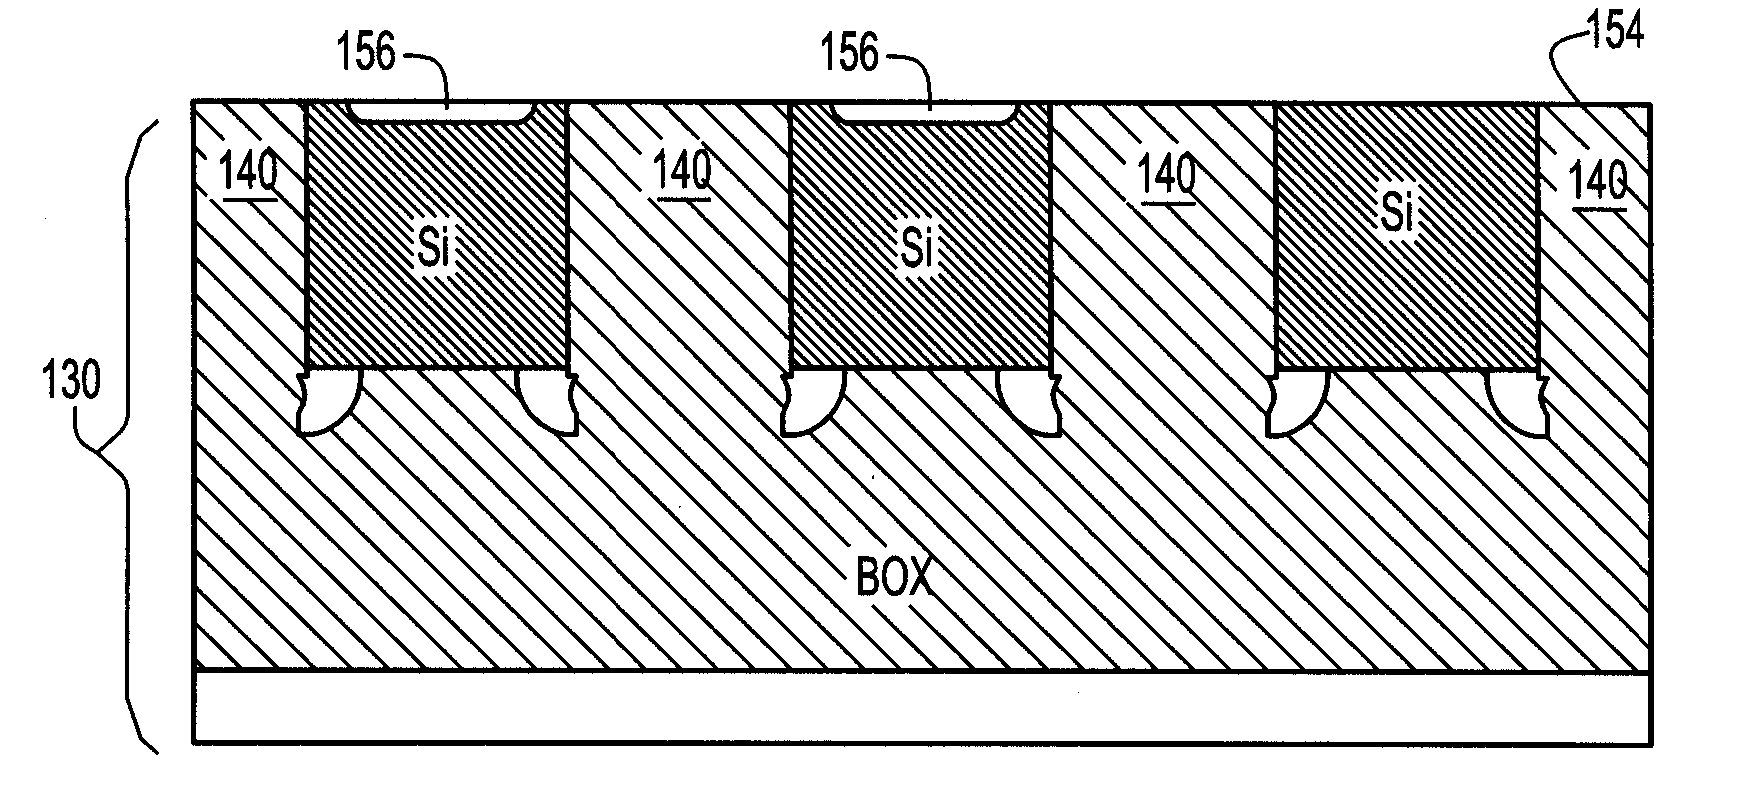 Silicon-on-insulator (SOI) read only memory (ROM) array and method of making a soi ROM